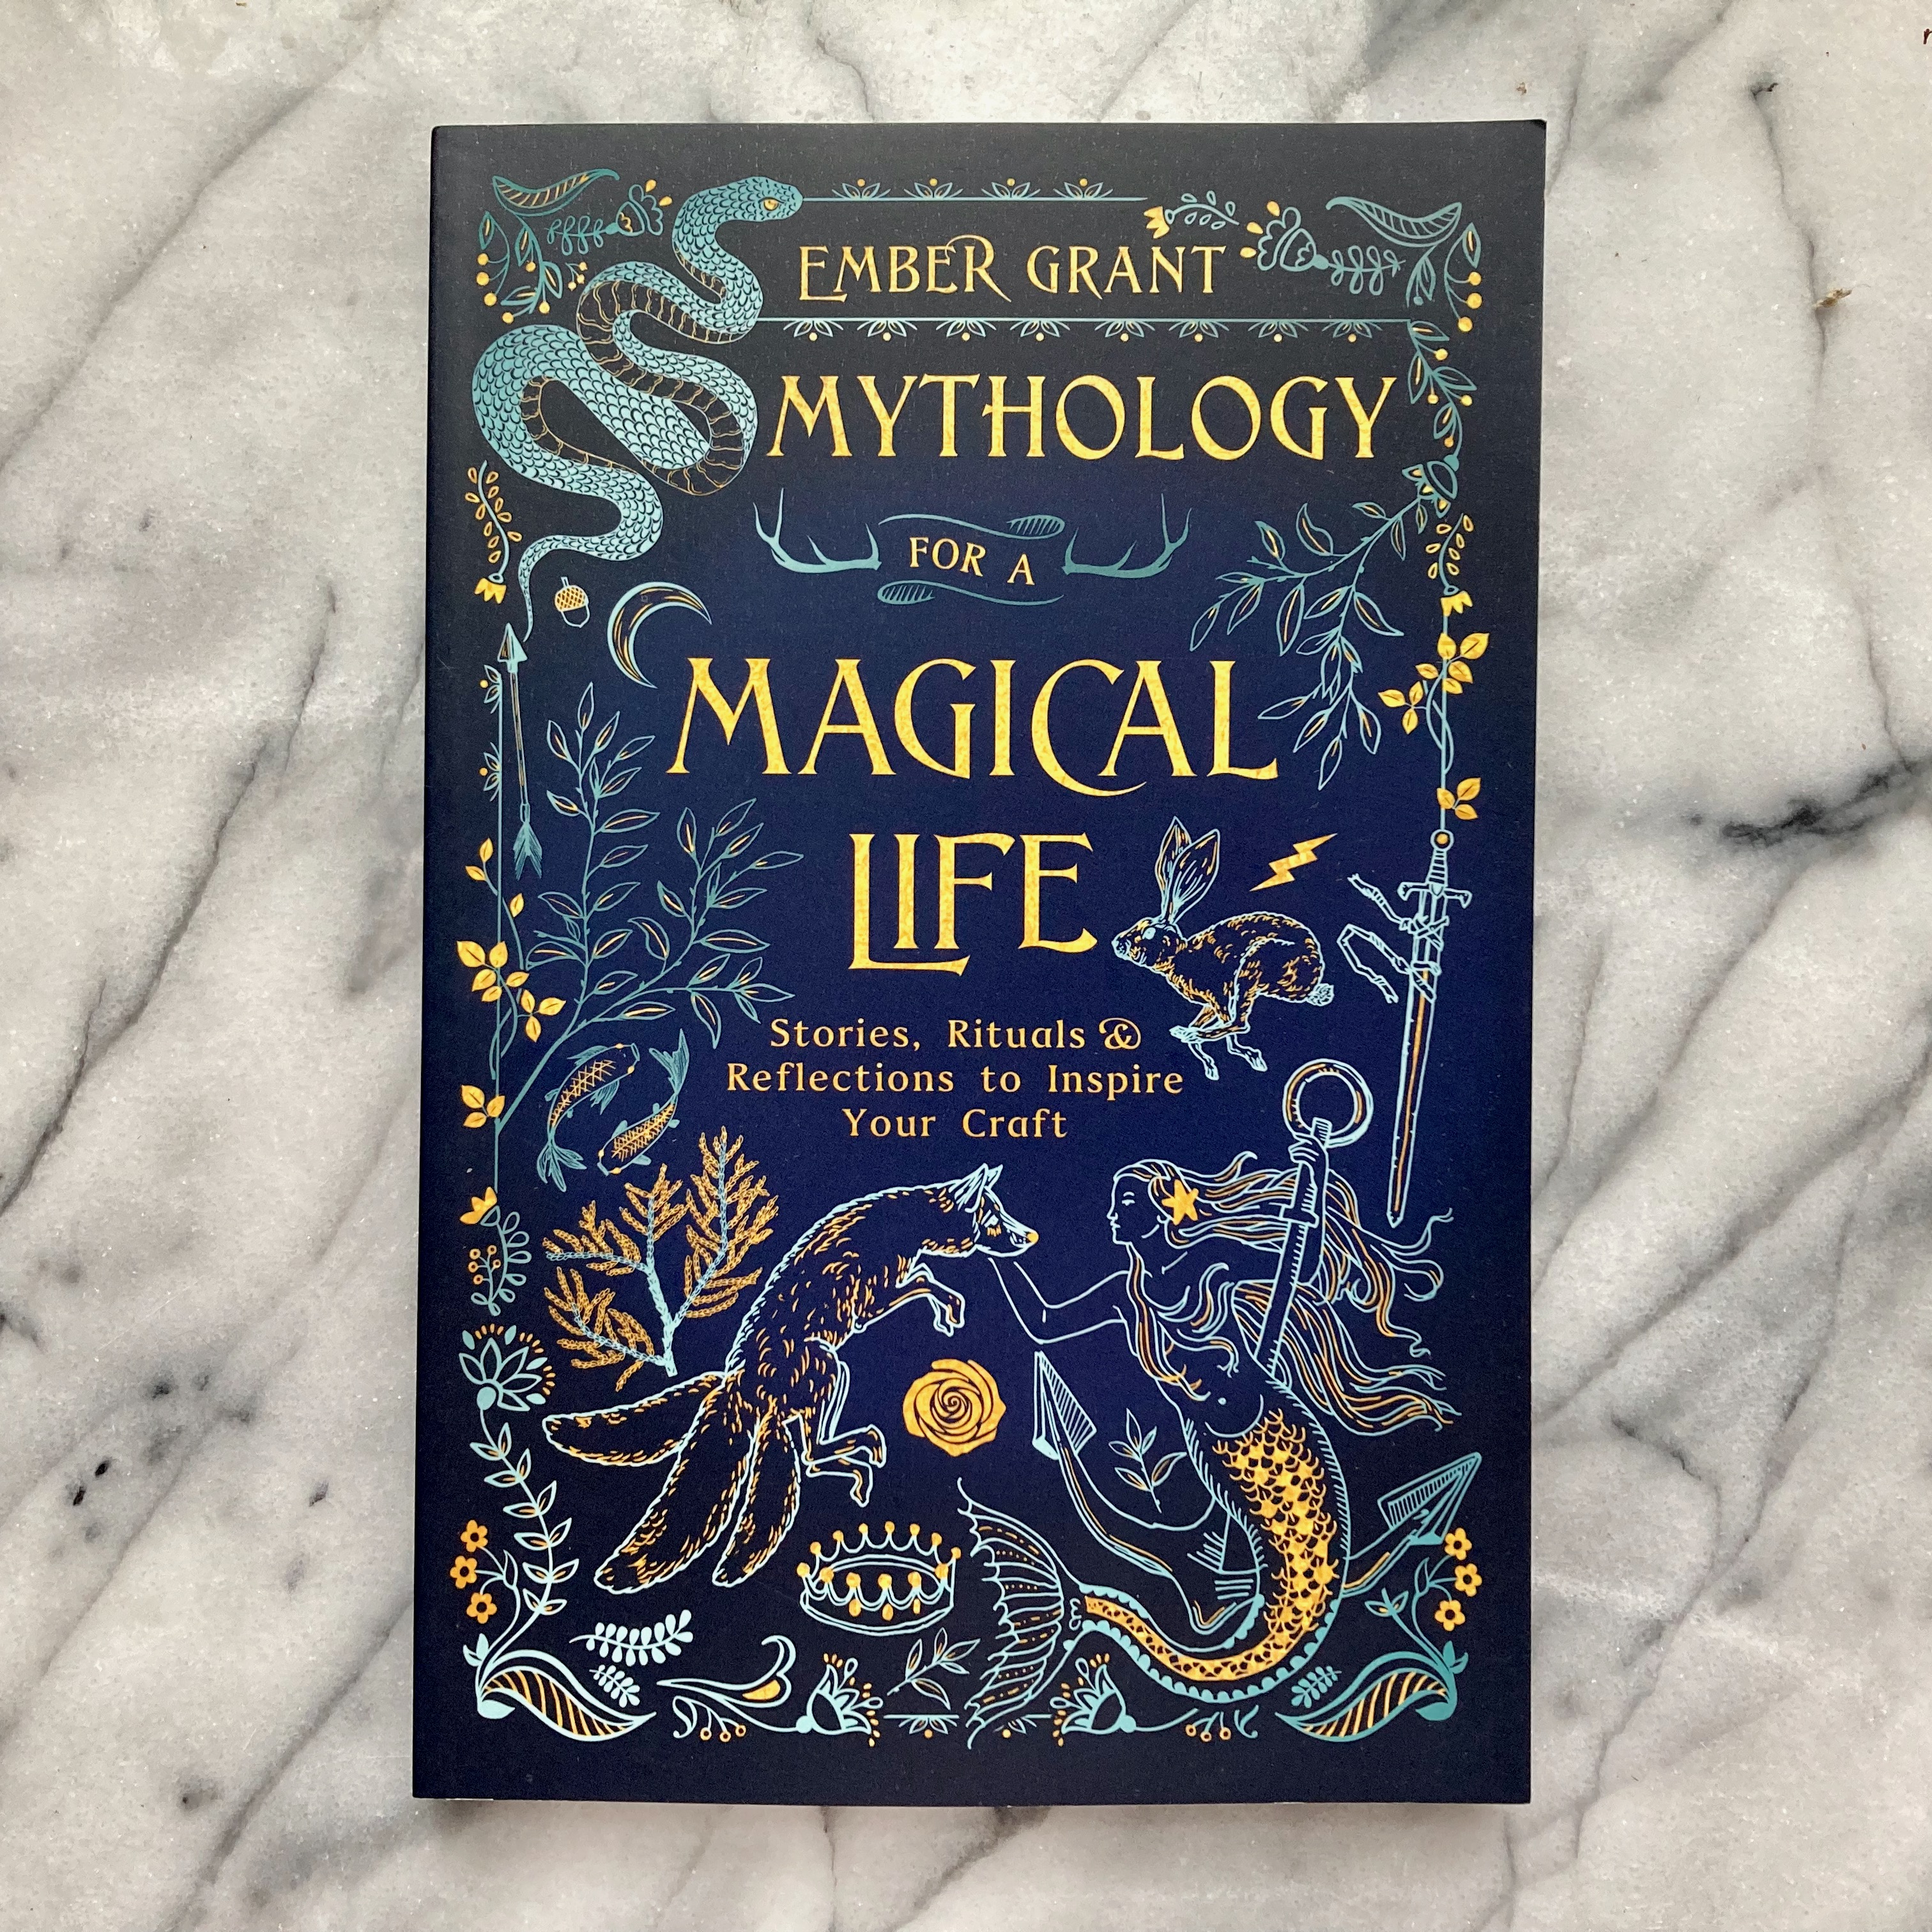 Mythology for a Magical Life by Ember Grant